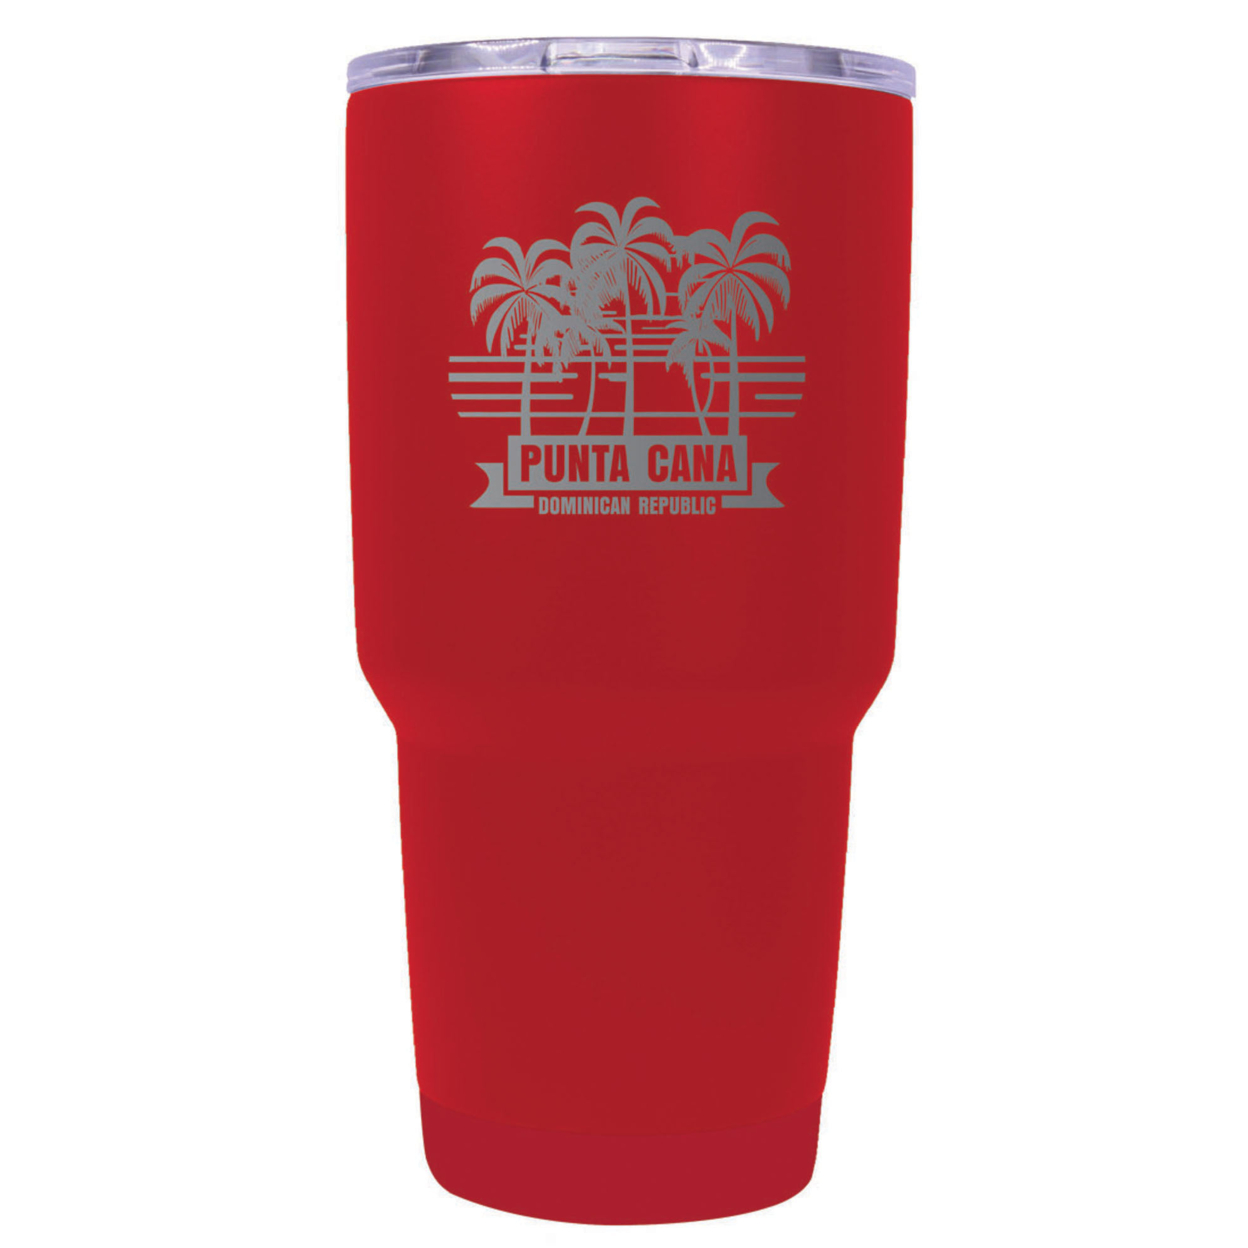 Punta Cana Dominican Republic Souvenir 24 Oz Insulated Stainless Steel Tumbler Etched - Red, PALM BEACH